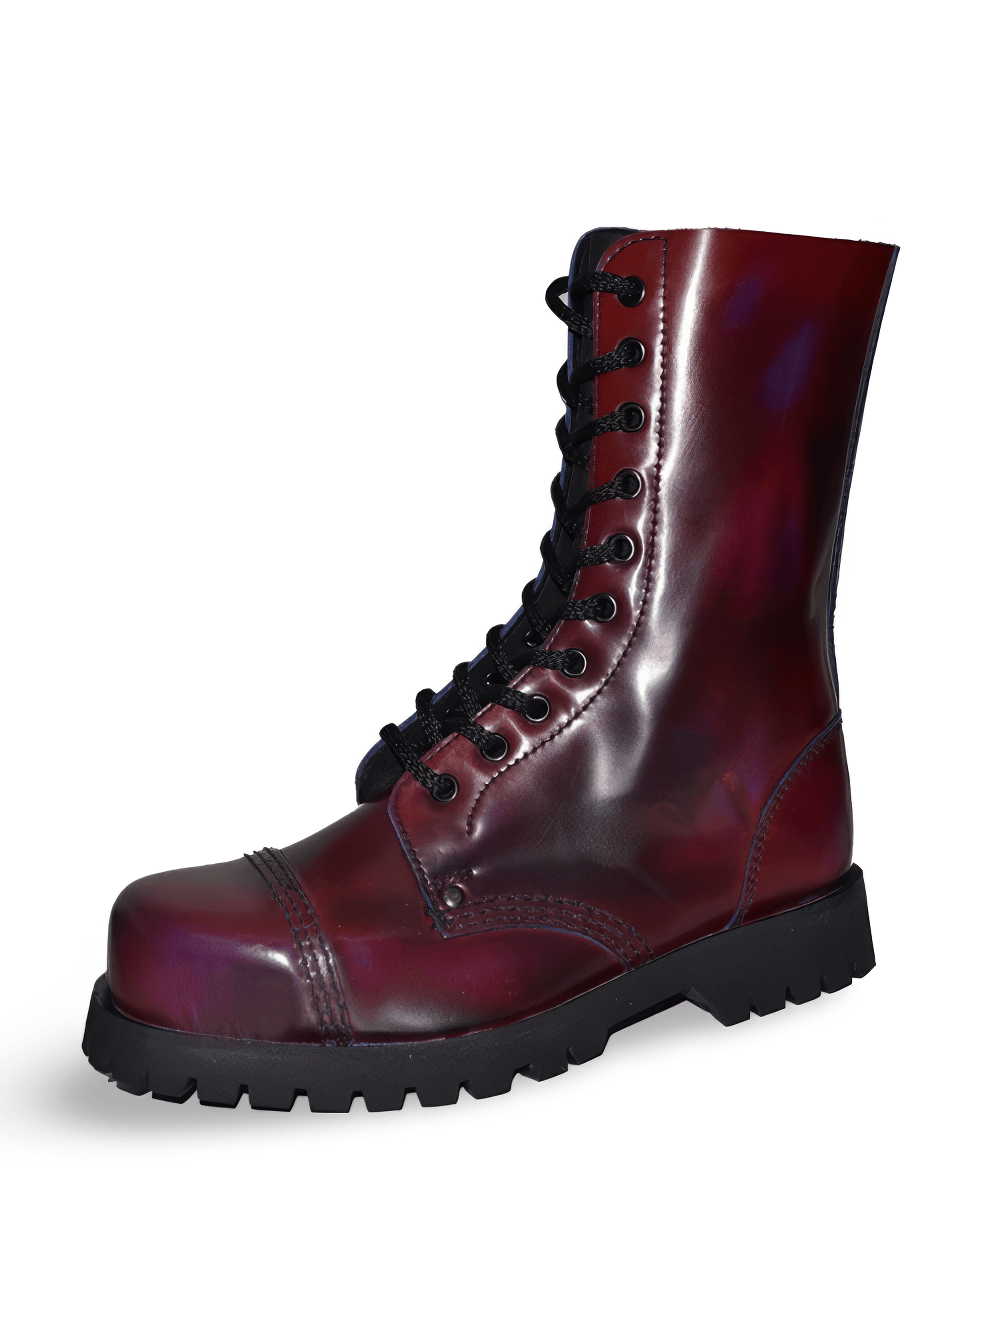 Wine Red Leather Lace Up Punk Boots for Men and Women